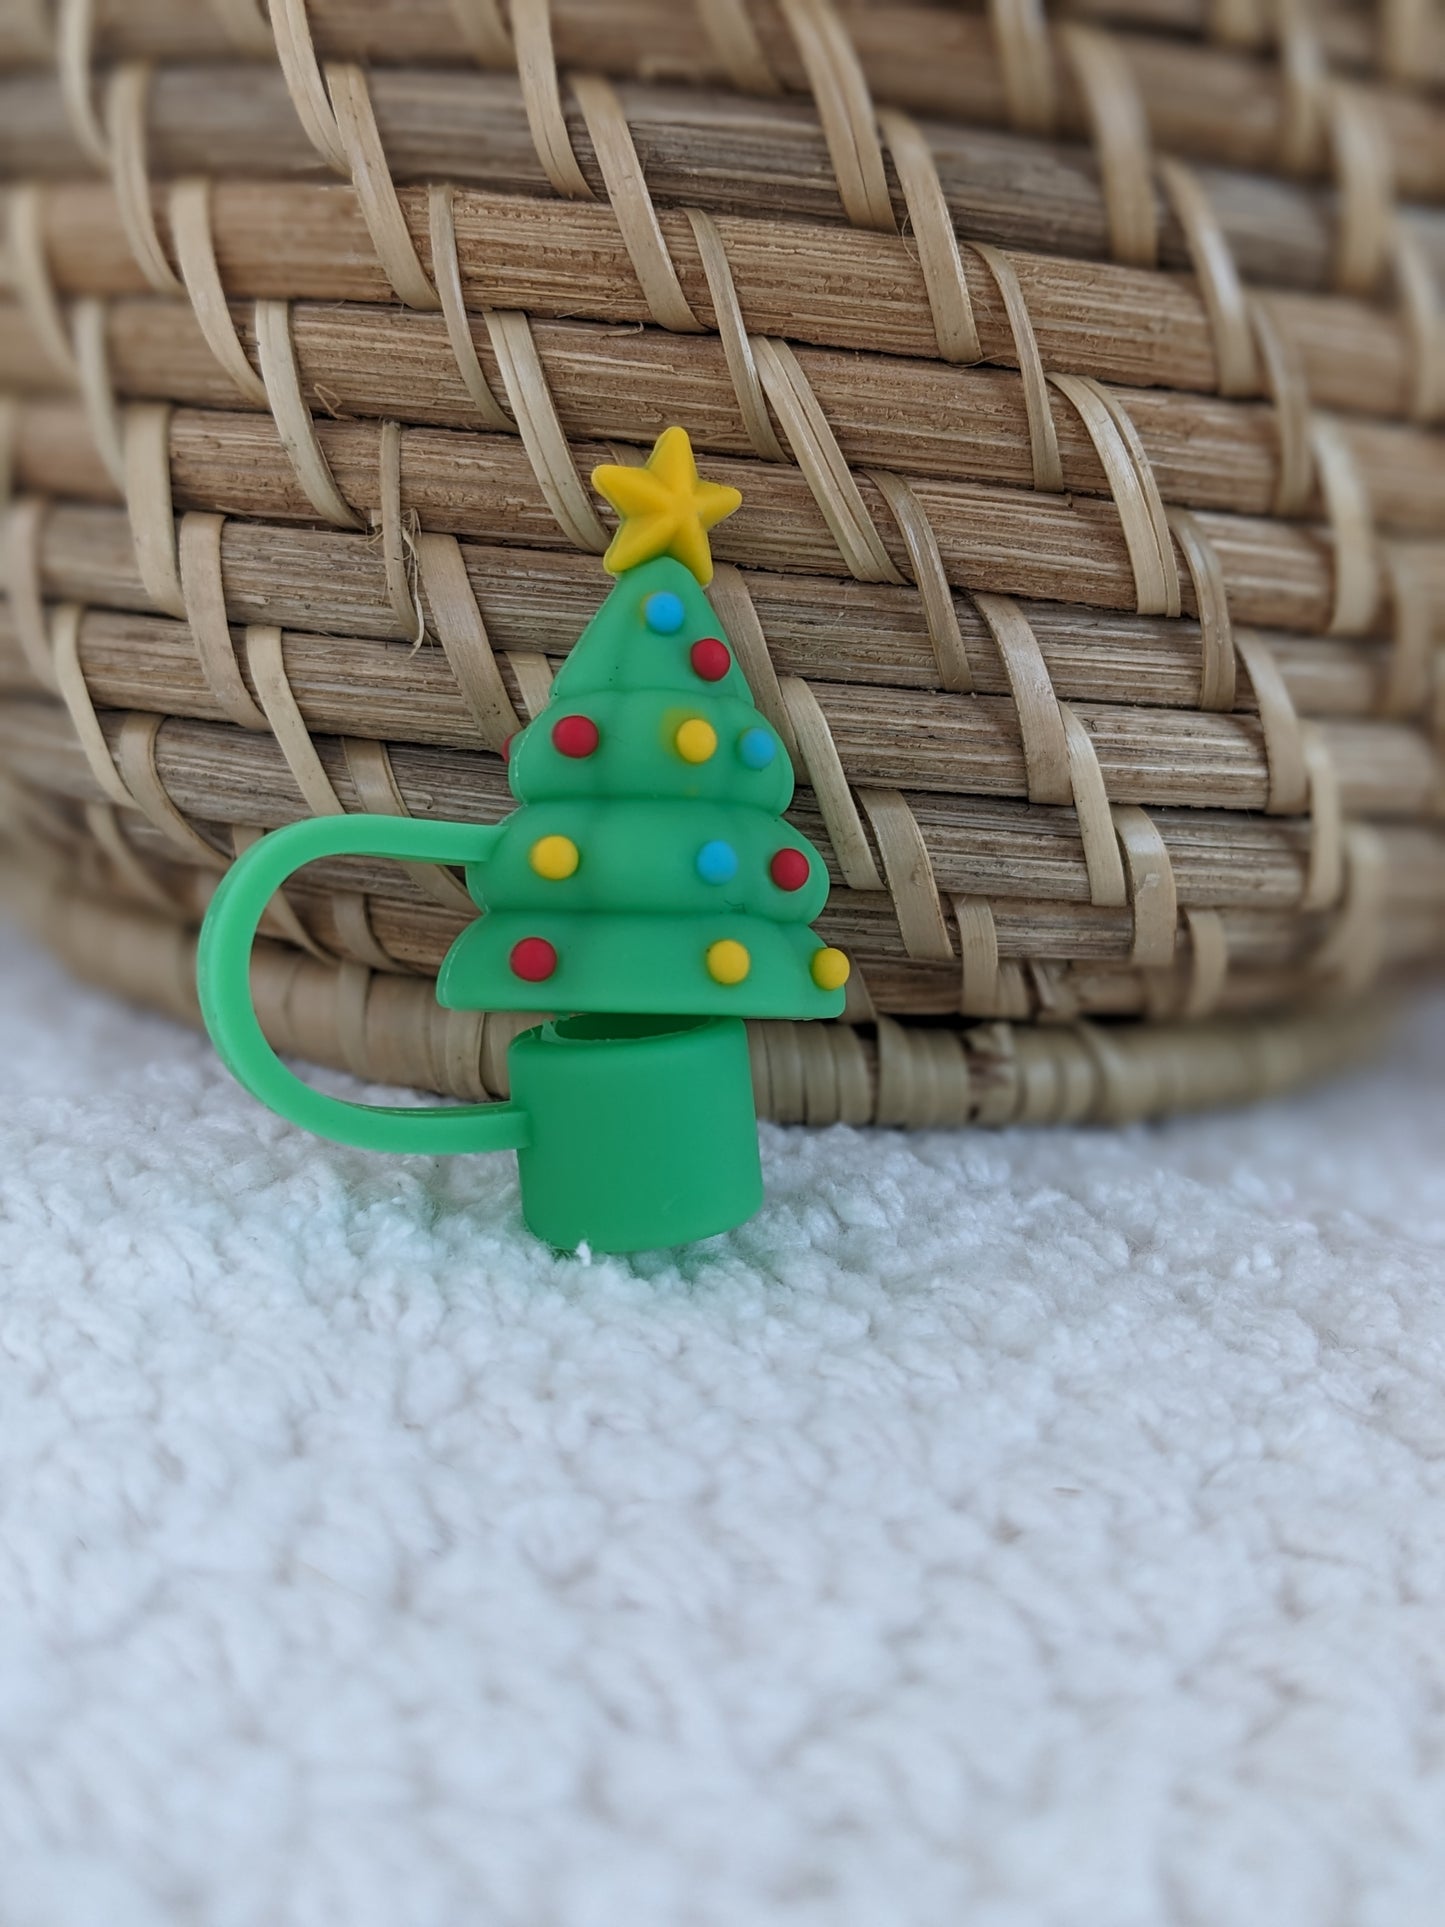 Christmas Tree Straw Cap Topper Stanley Accessory Straw Cap 